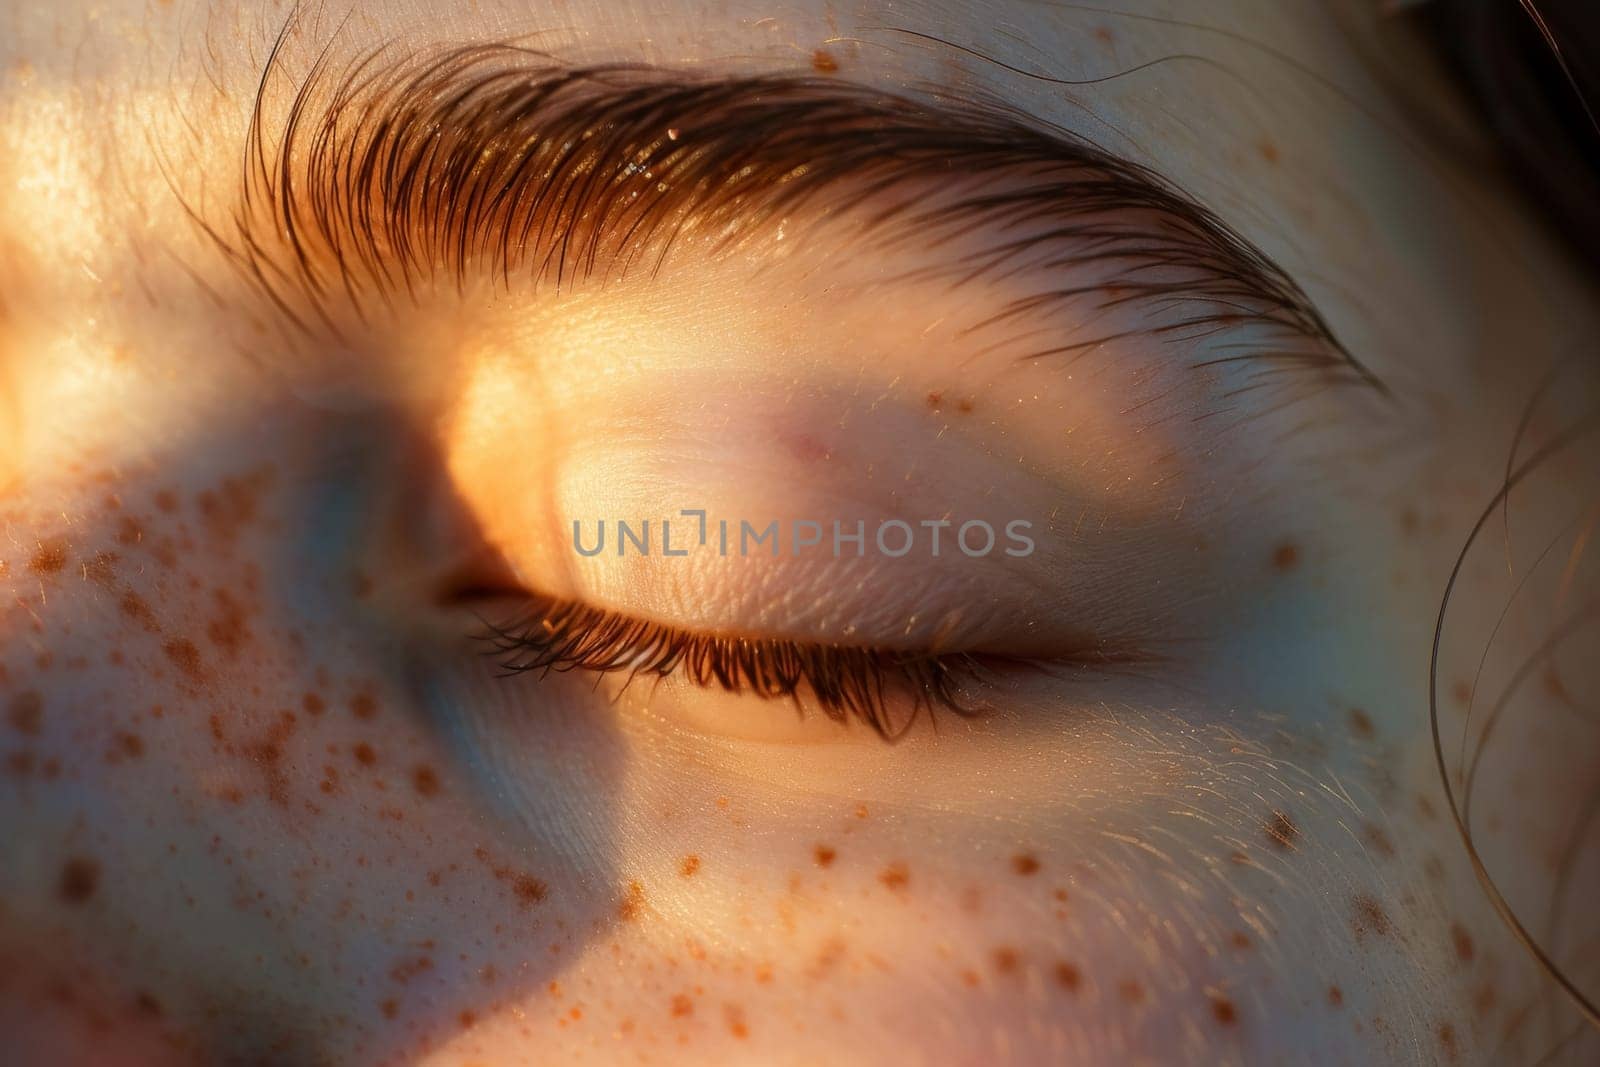 Close-up shot captures the exquisite detail and natural glow of healthy skin basked in warm light, highlighting fine textures.